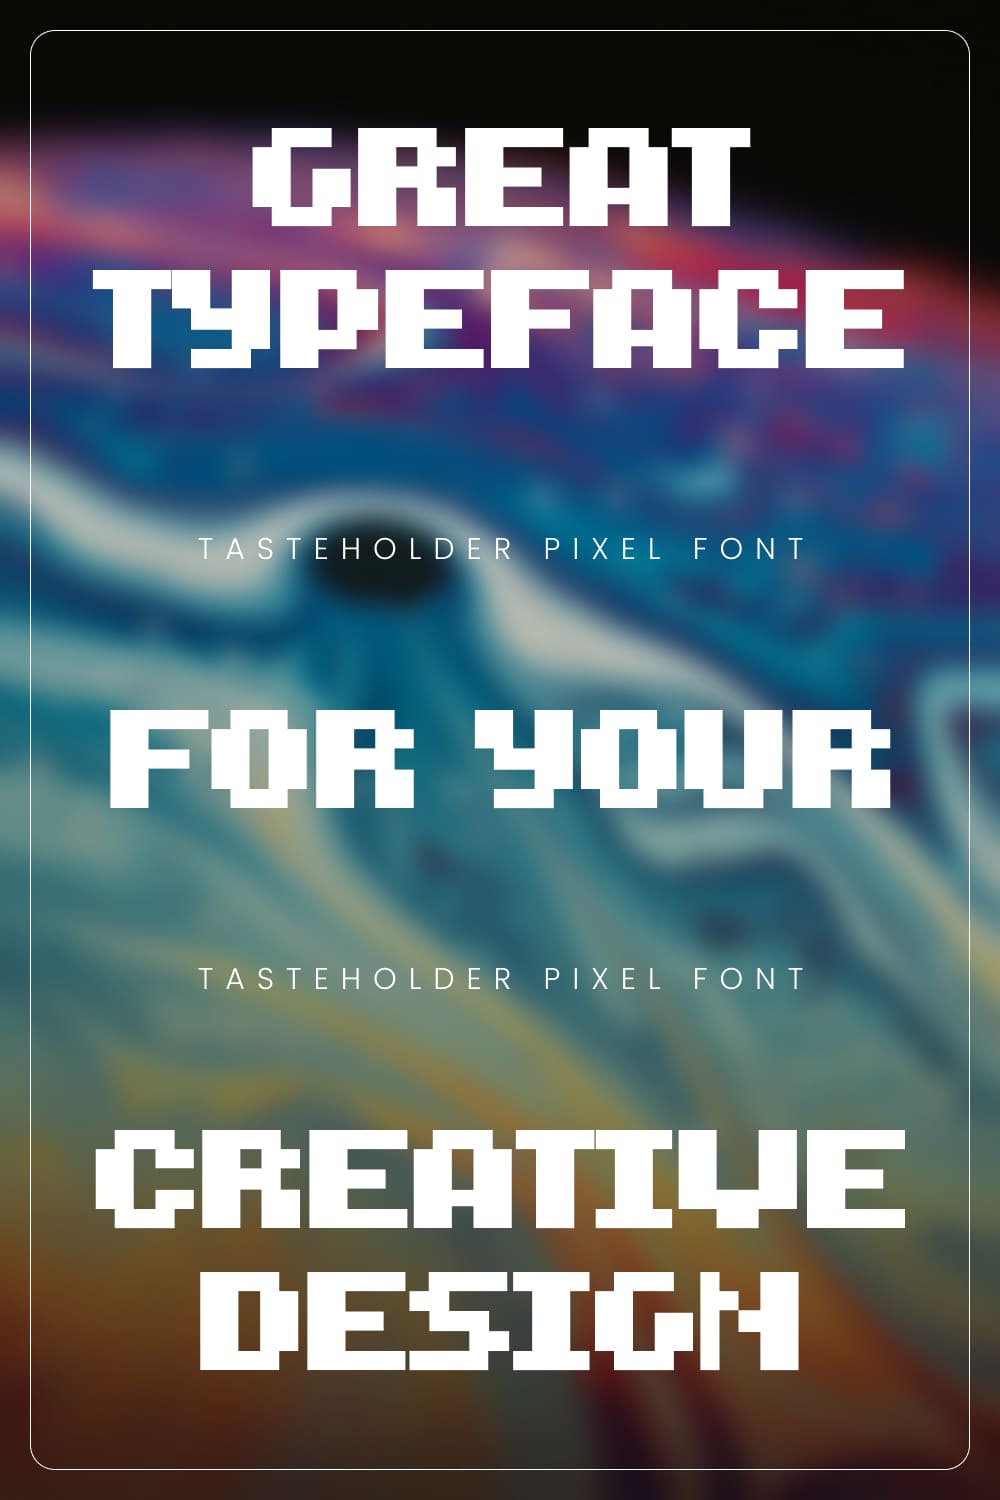 The example of great typeface for your creative design.